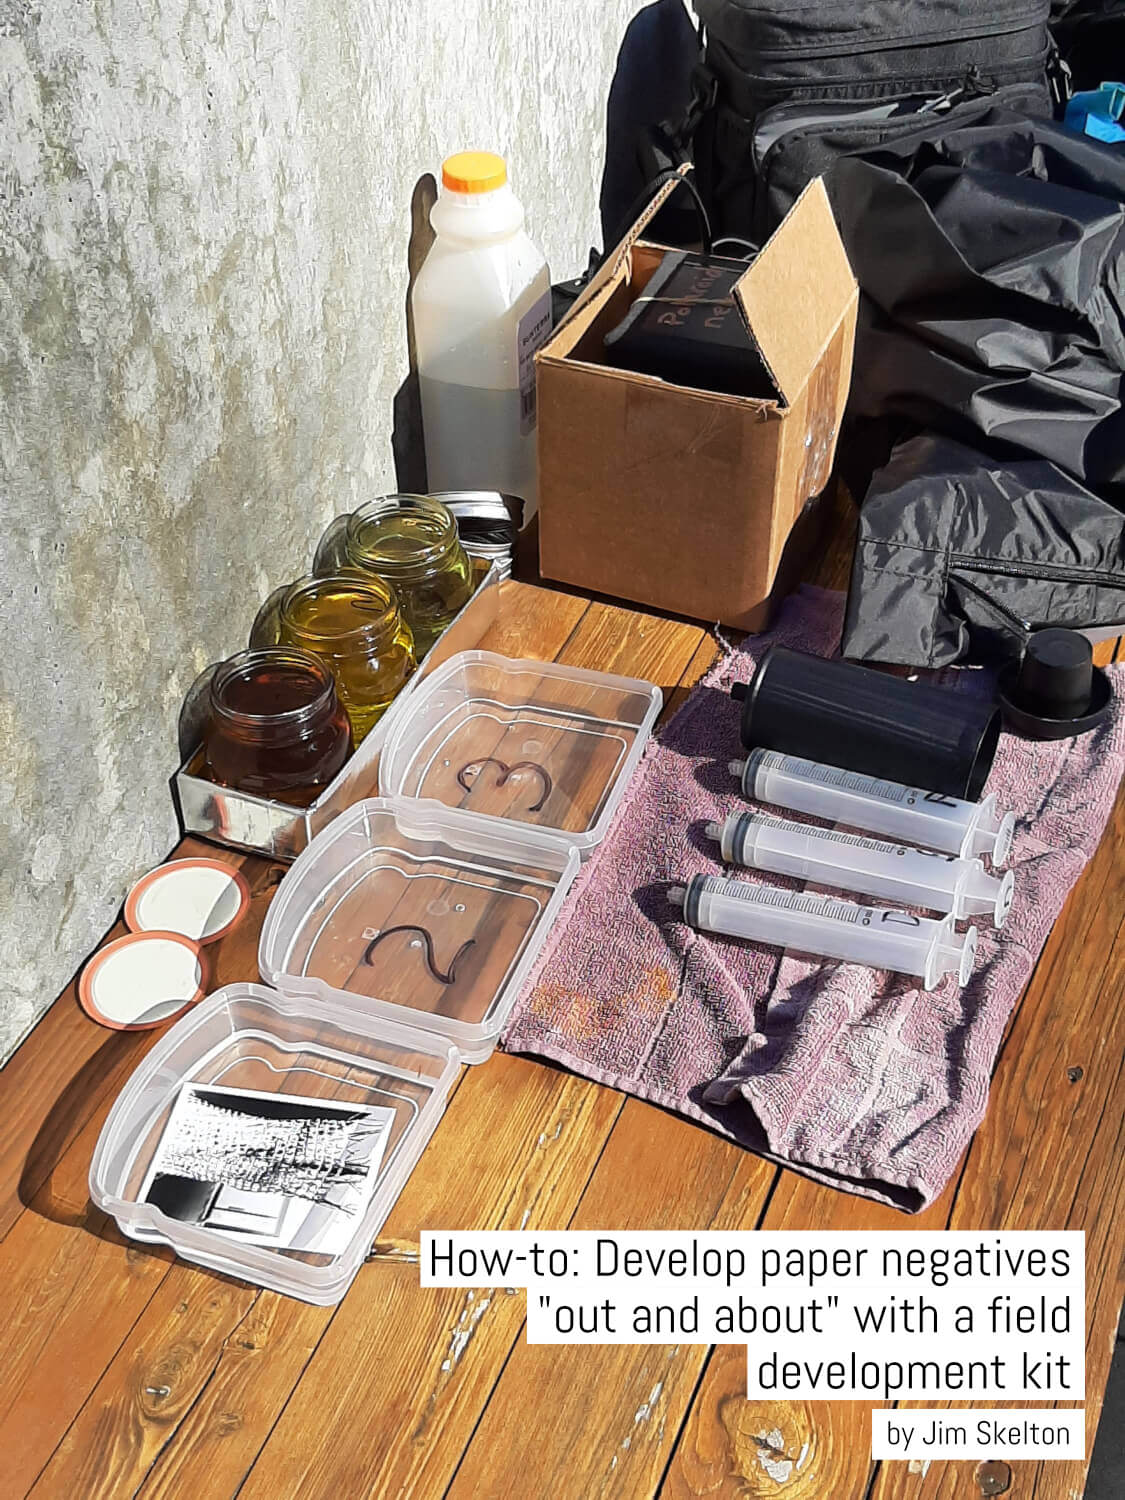 How-to: Develop paper negatives "out and about" with a field development kit - by Jim Skelton